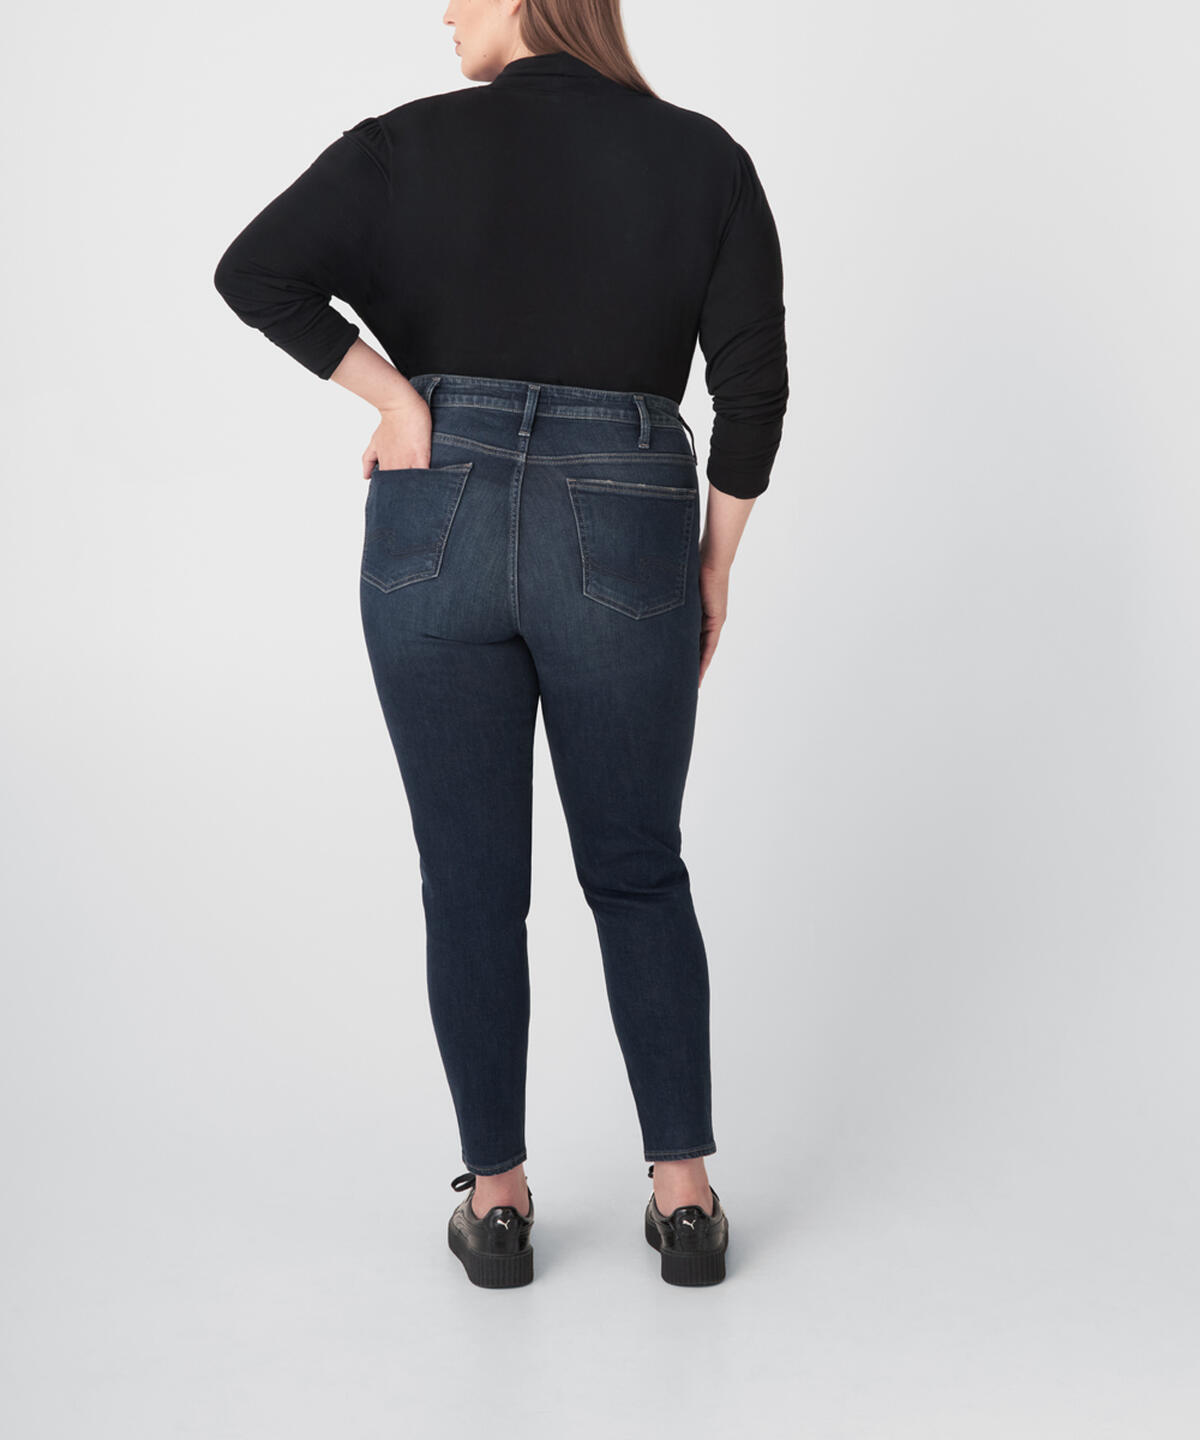 Avery High Rise Skinny Jeans Plus Size, , hi-res image number 1